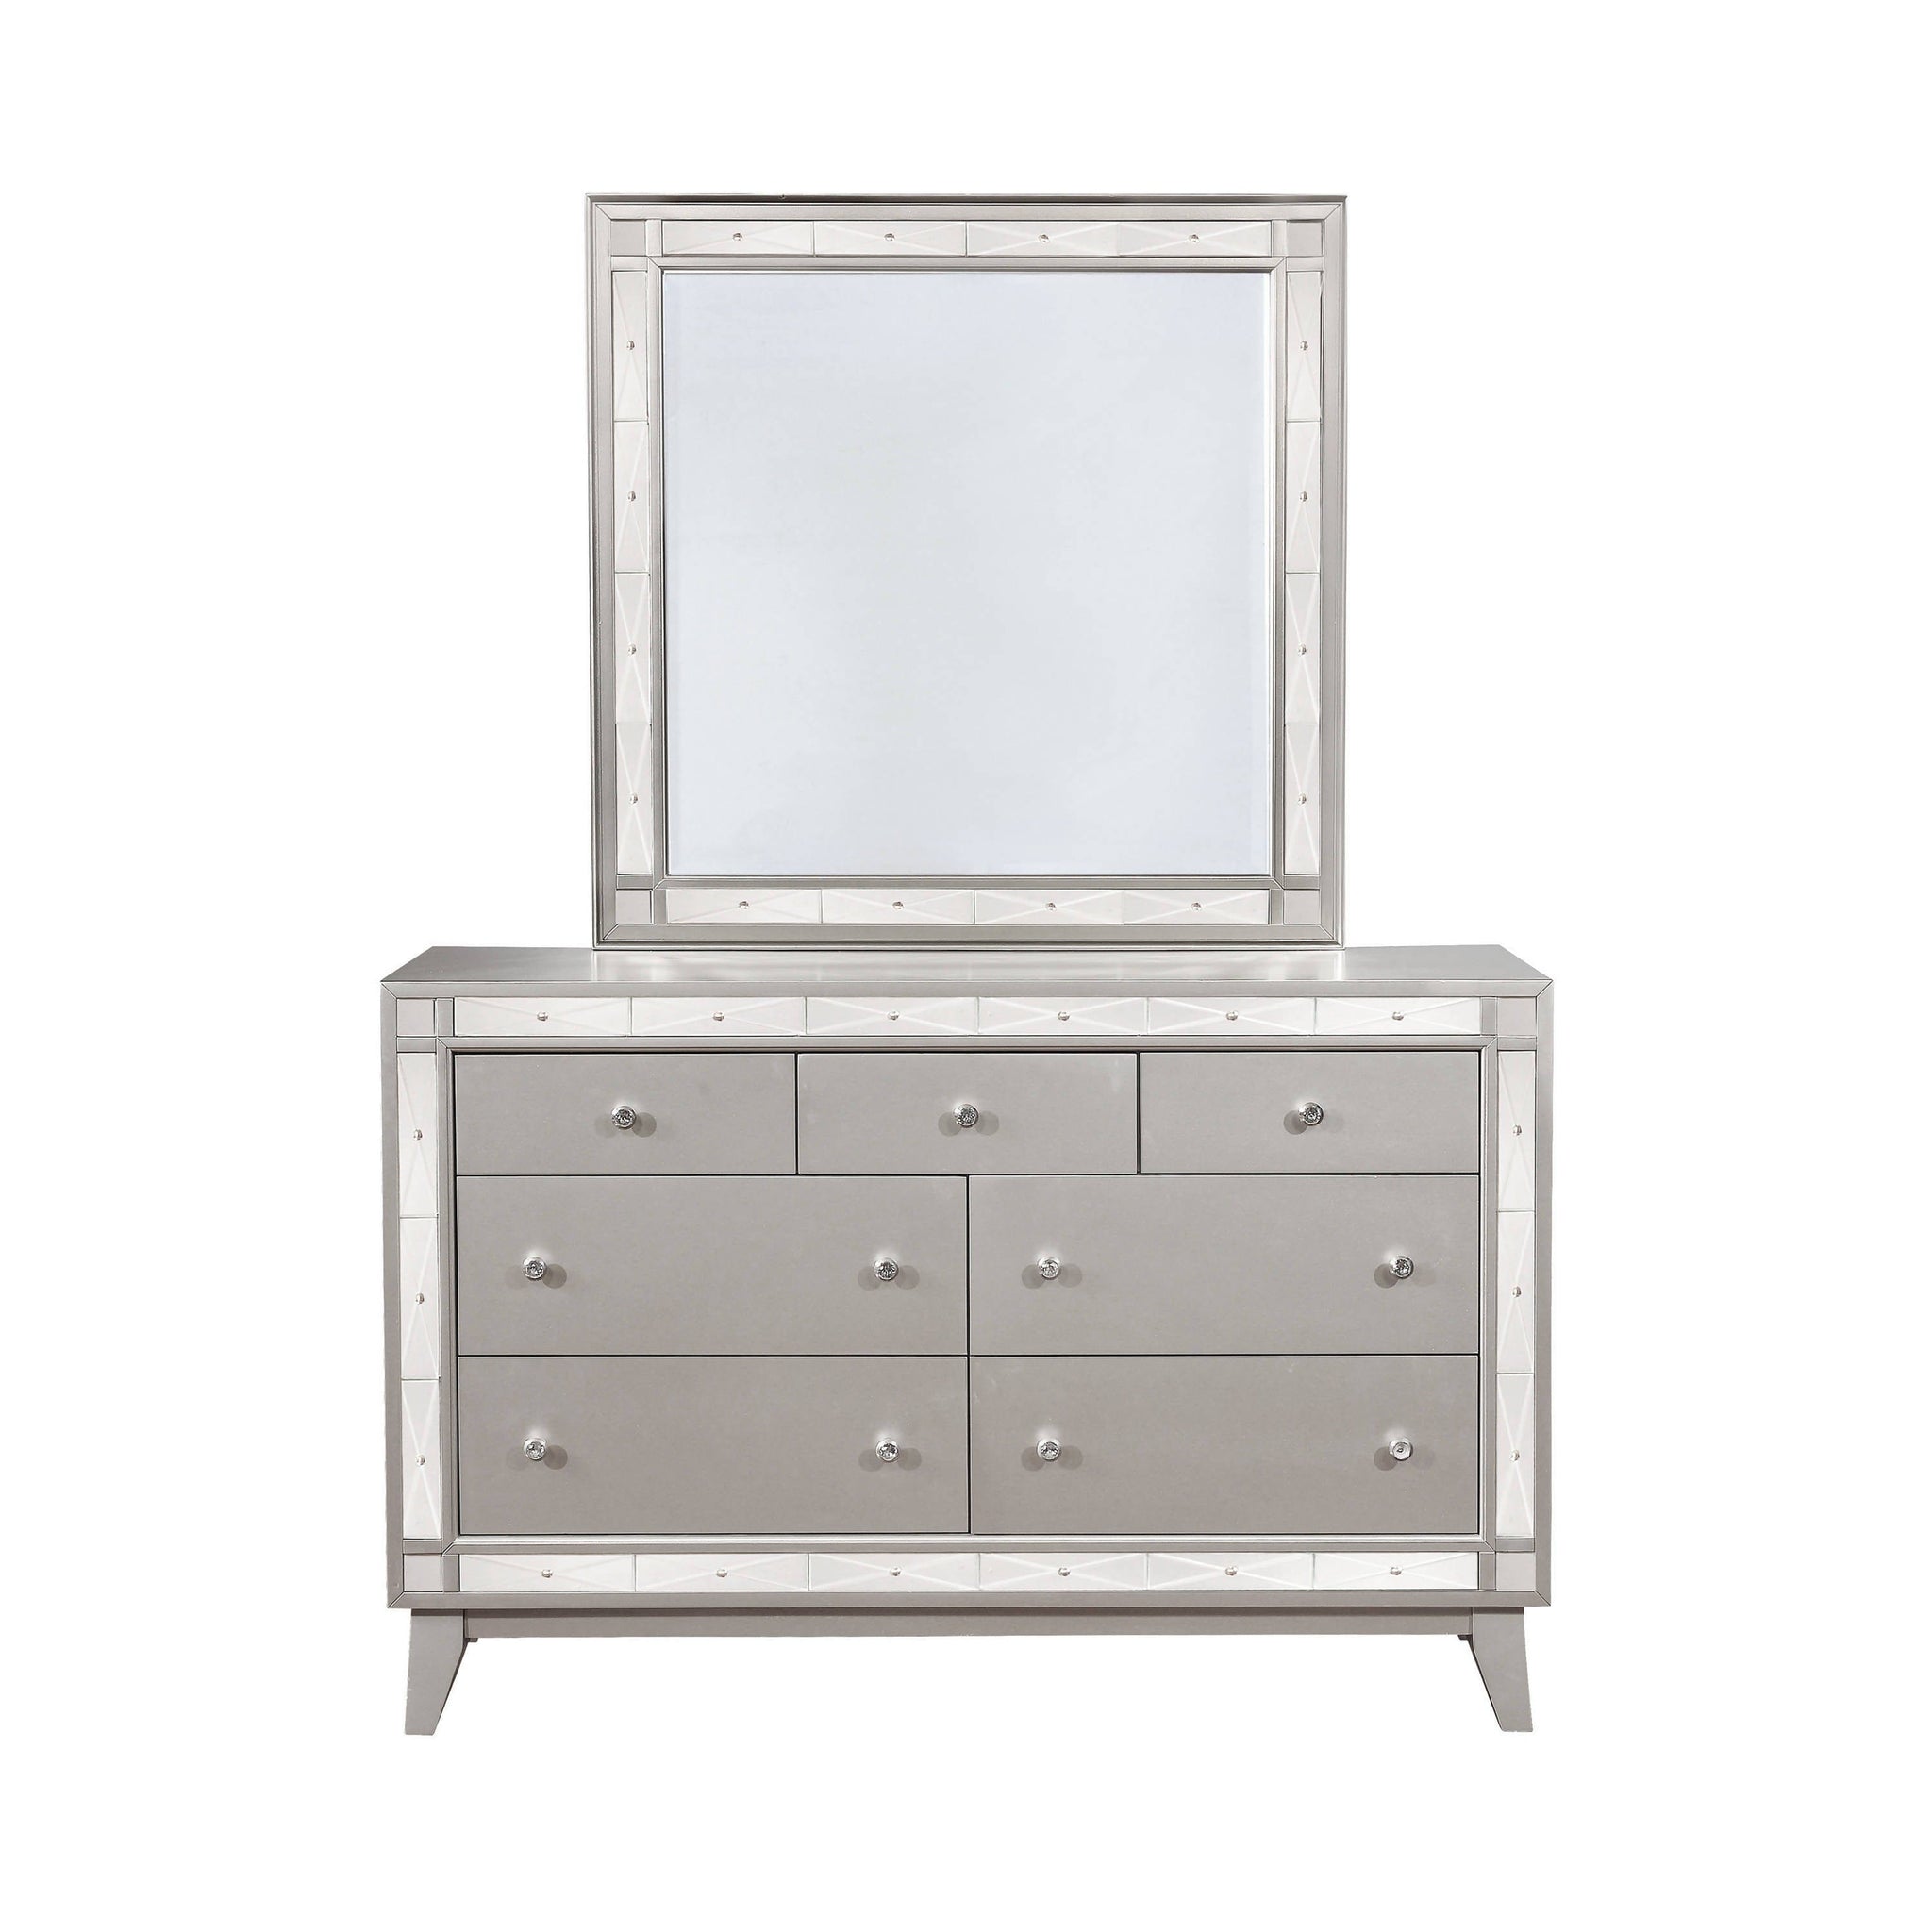 Leighton Beveled Mirror Metallic Mercury Collection: Transform A Sophisticated Space With This Radiant Transitional Mirror, This Mirror Looks Great Above A Mirror. Leighton SKU: 204924